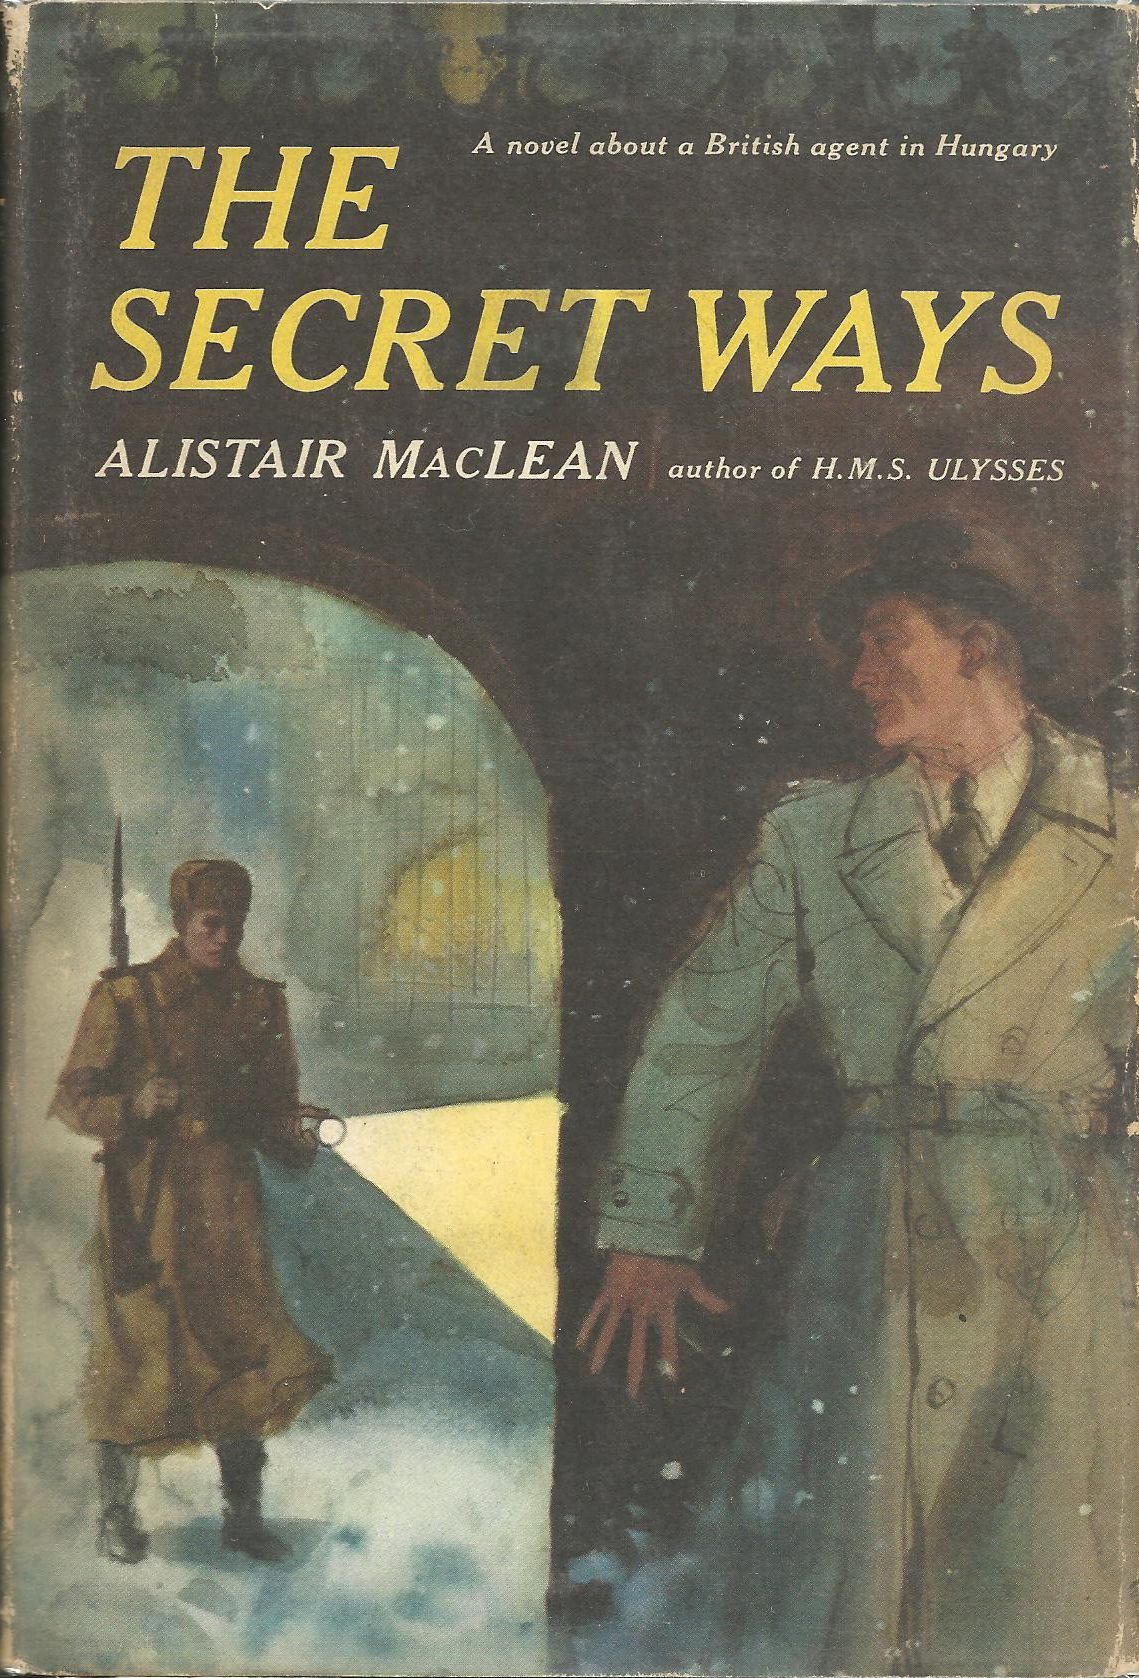 The Secret Ways - US first edition